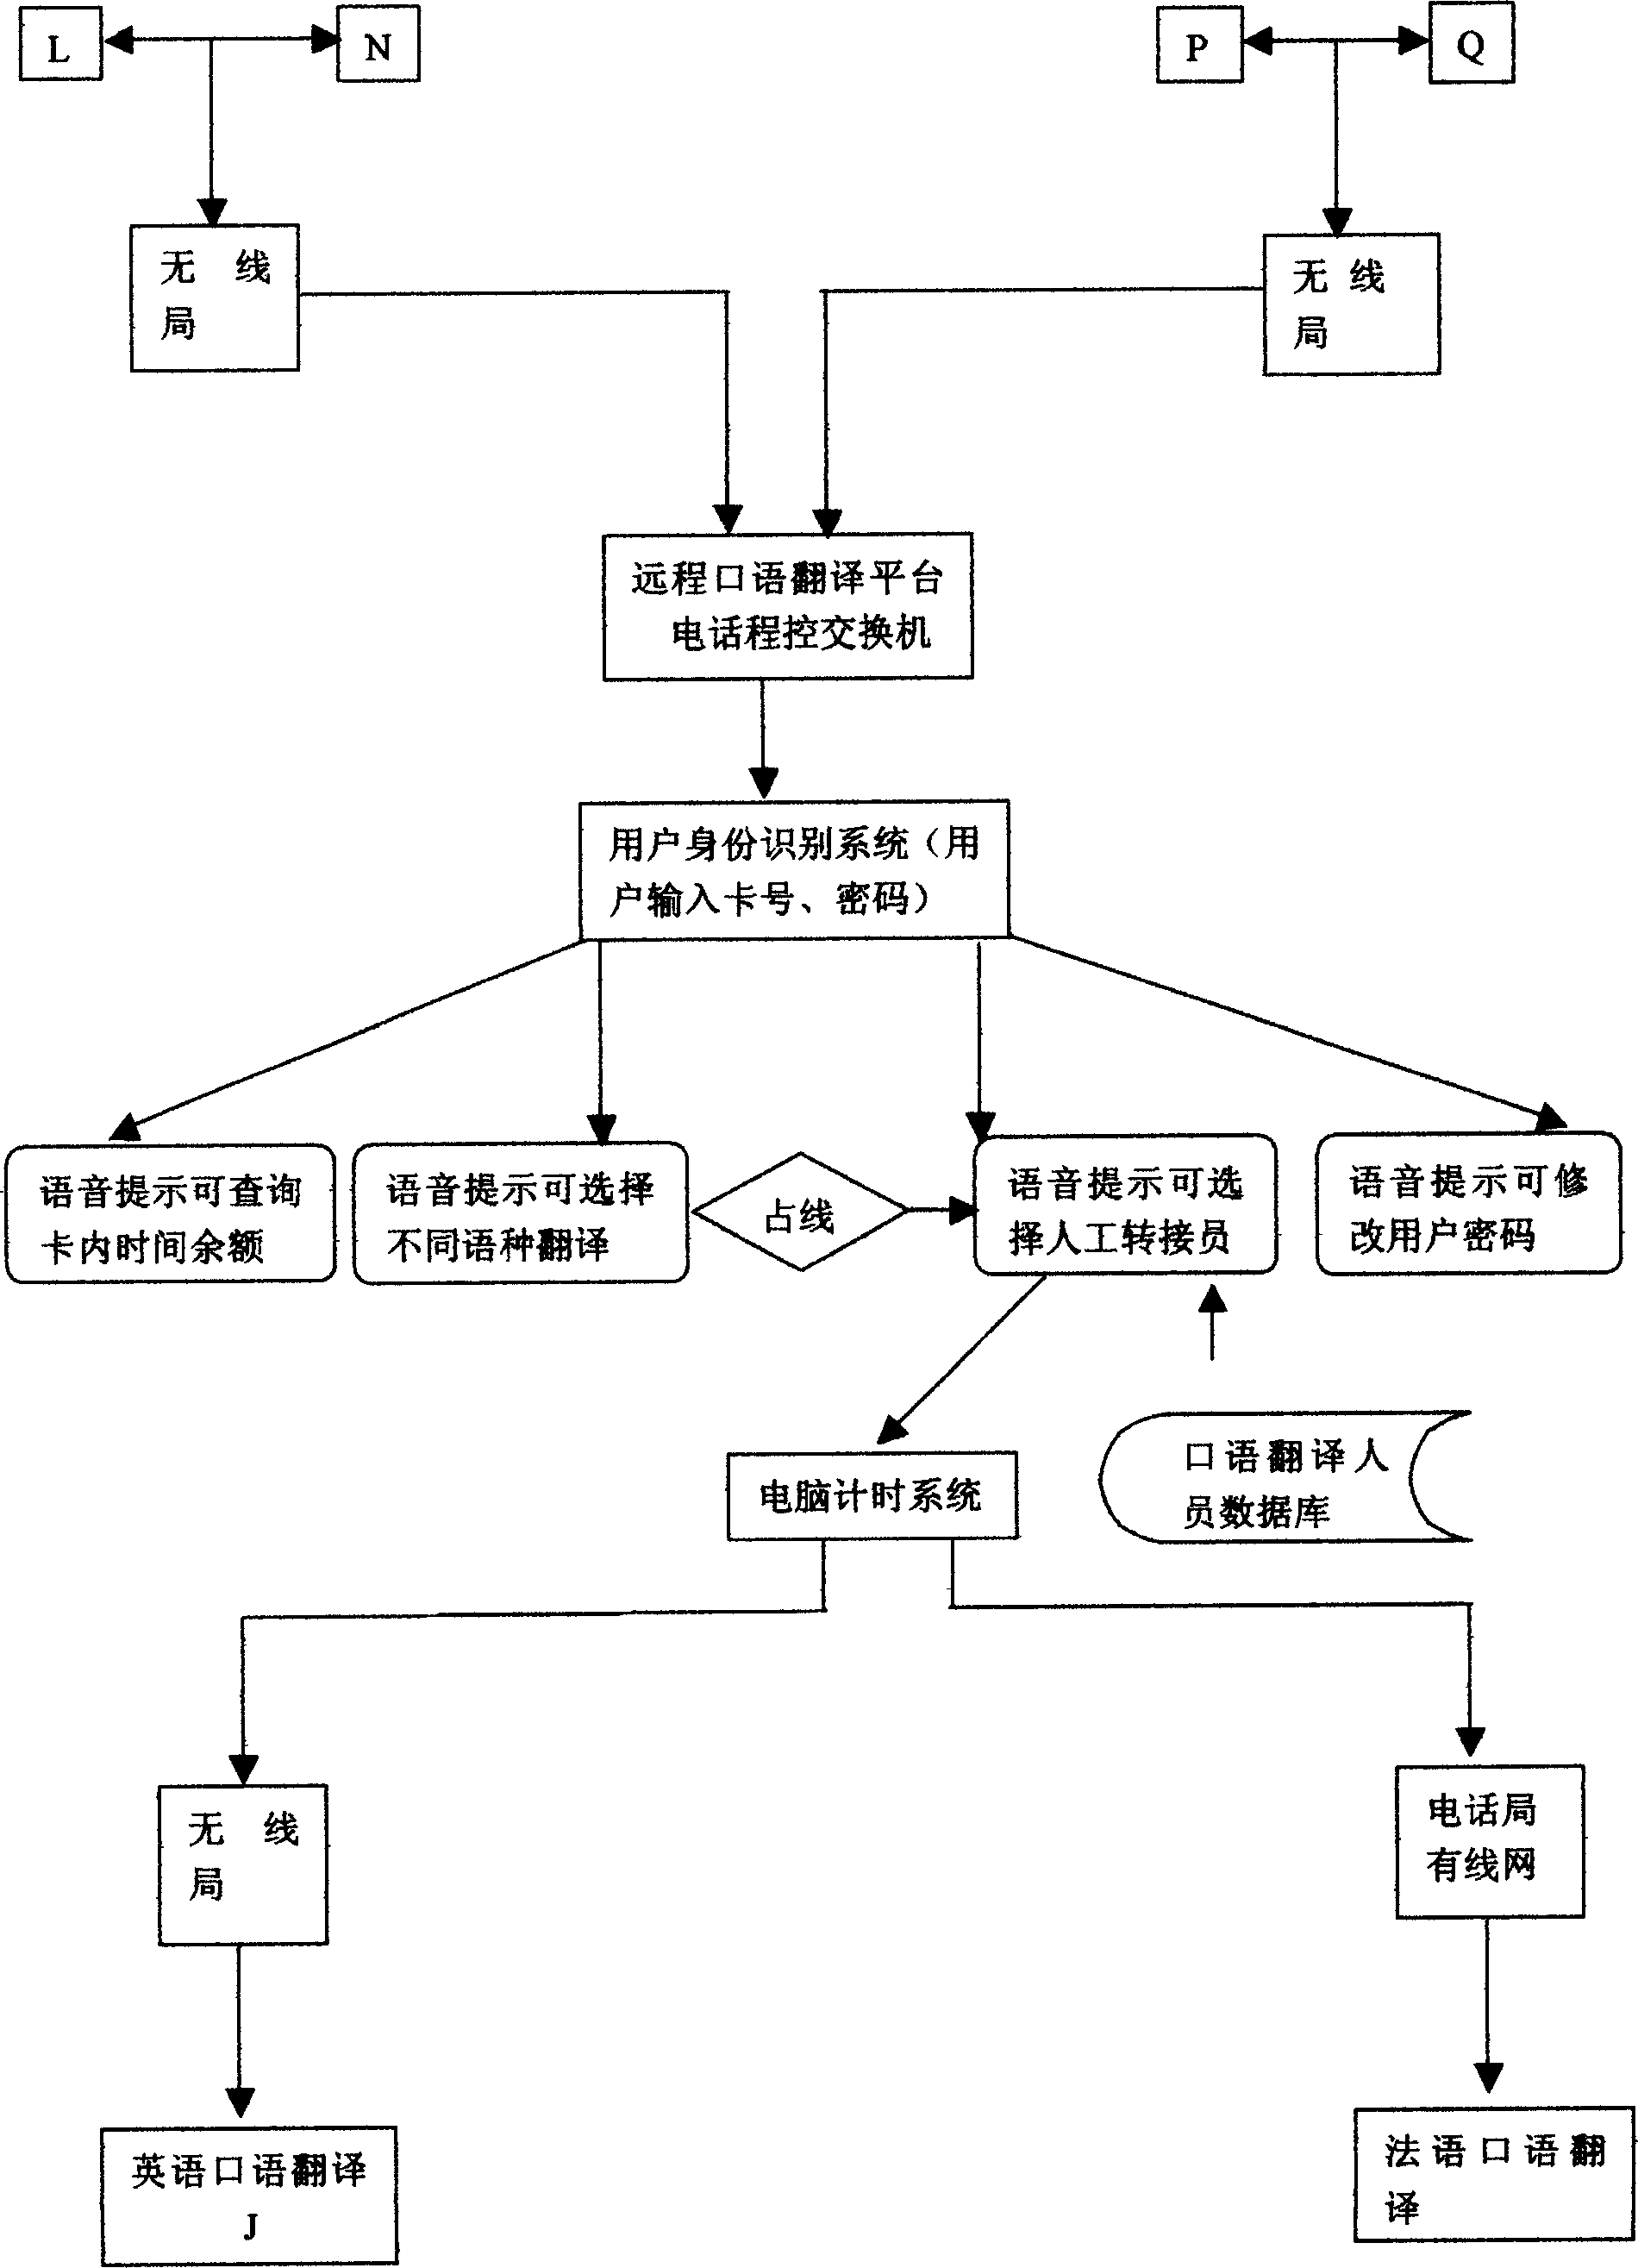 Blue-tooth mobile telephone long-distance oral interpreting system and operating method